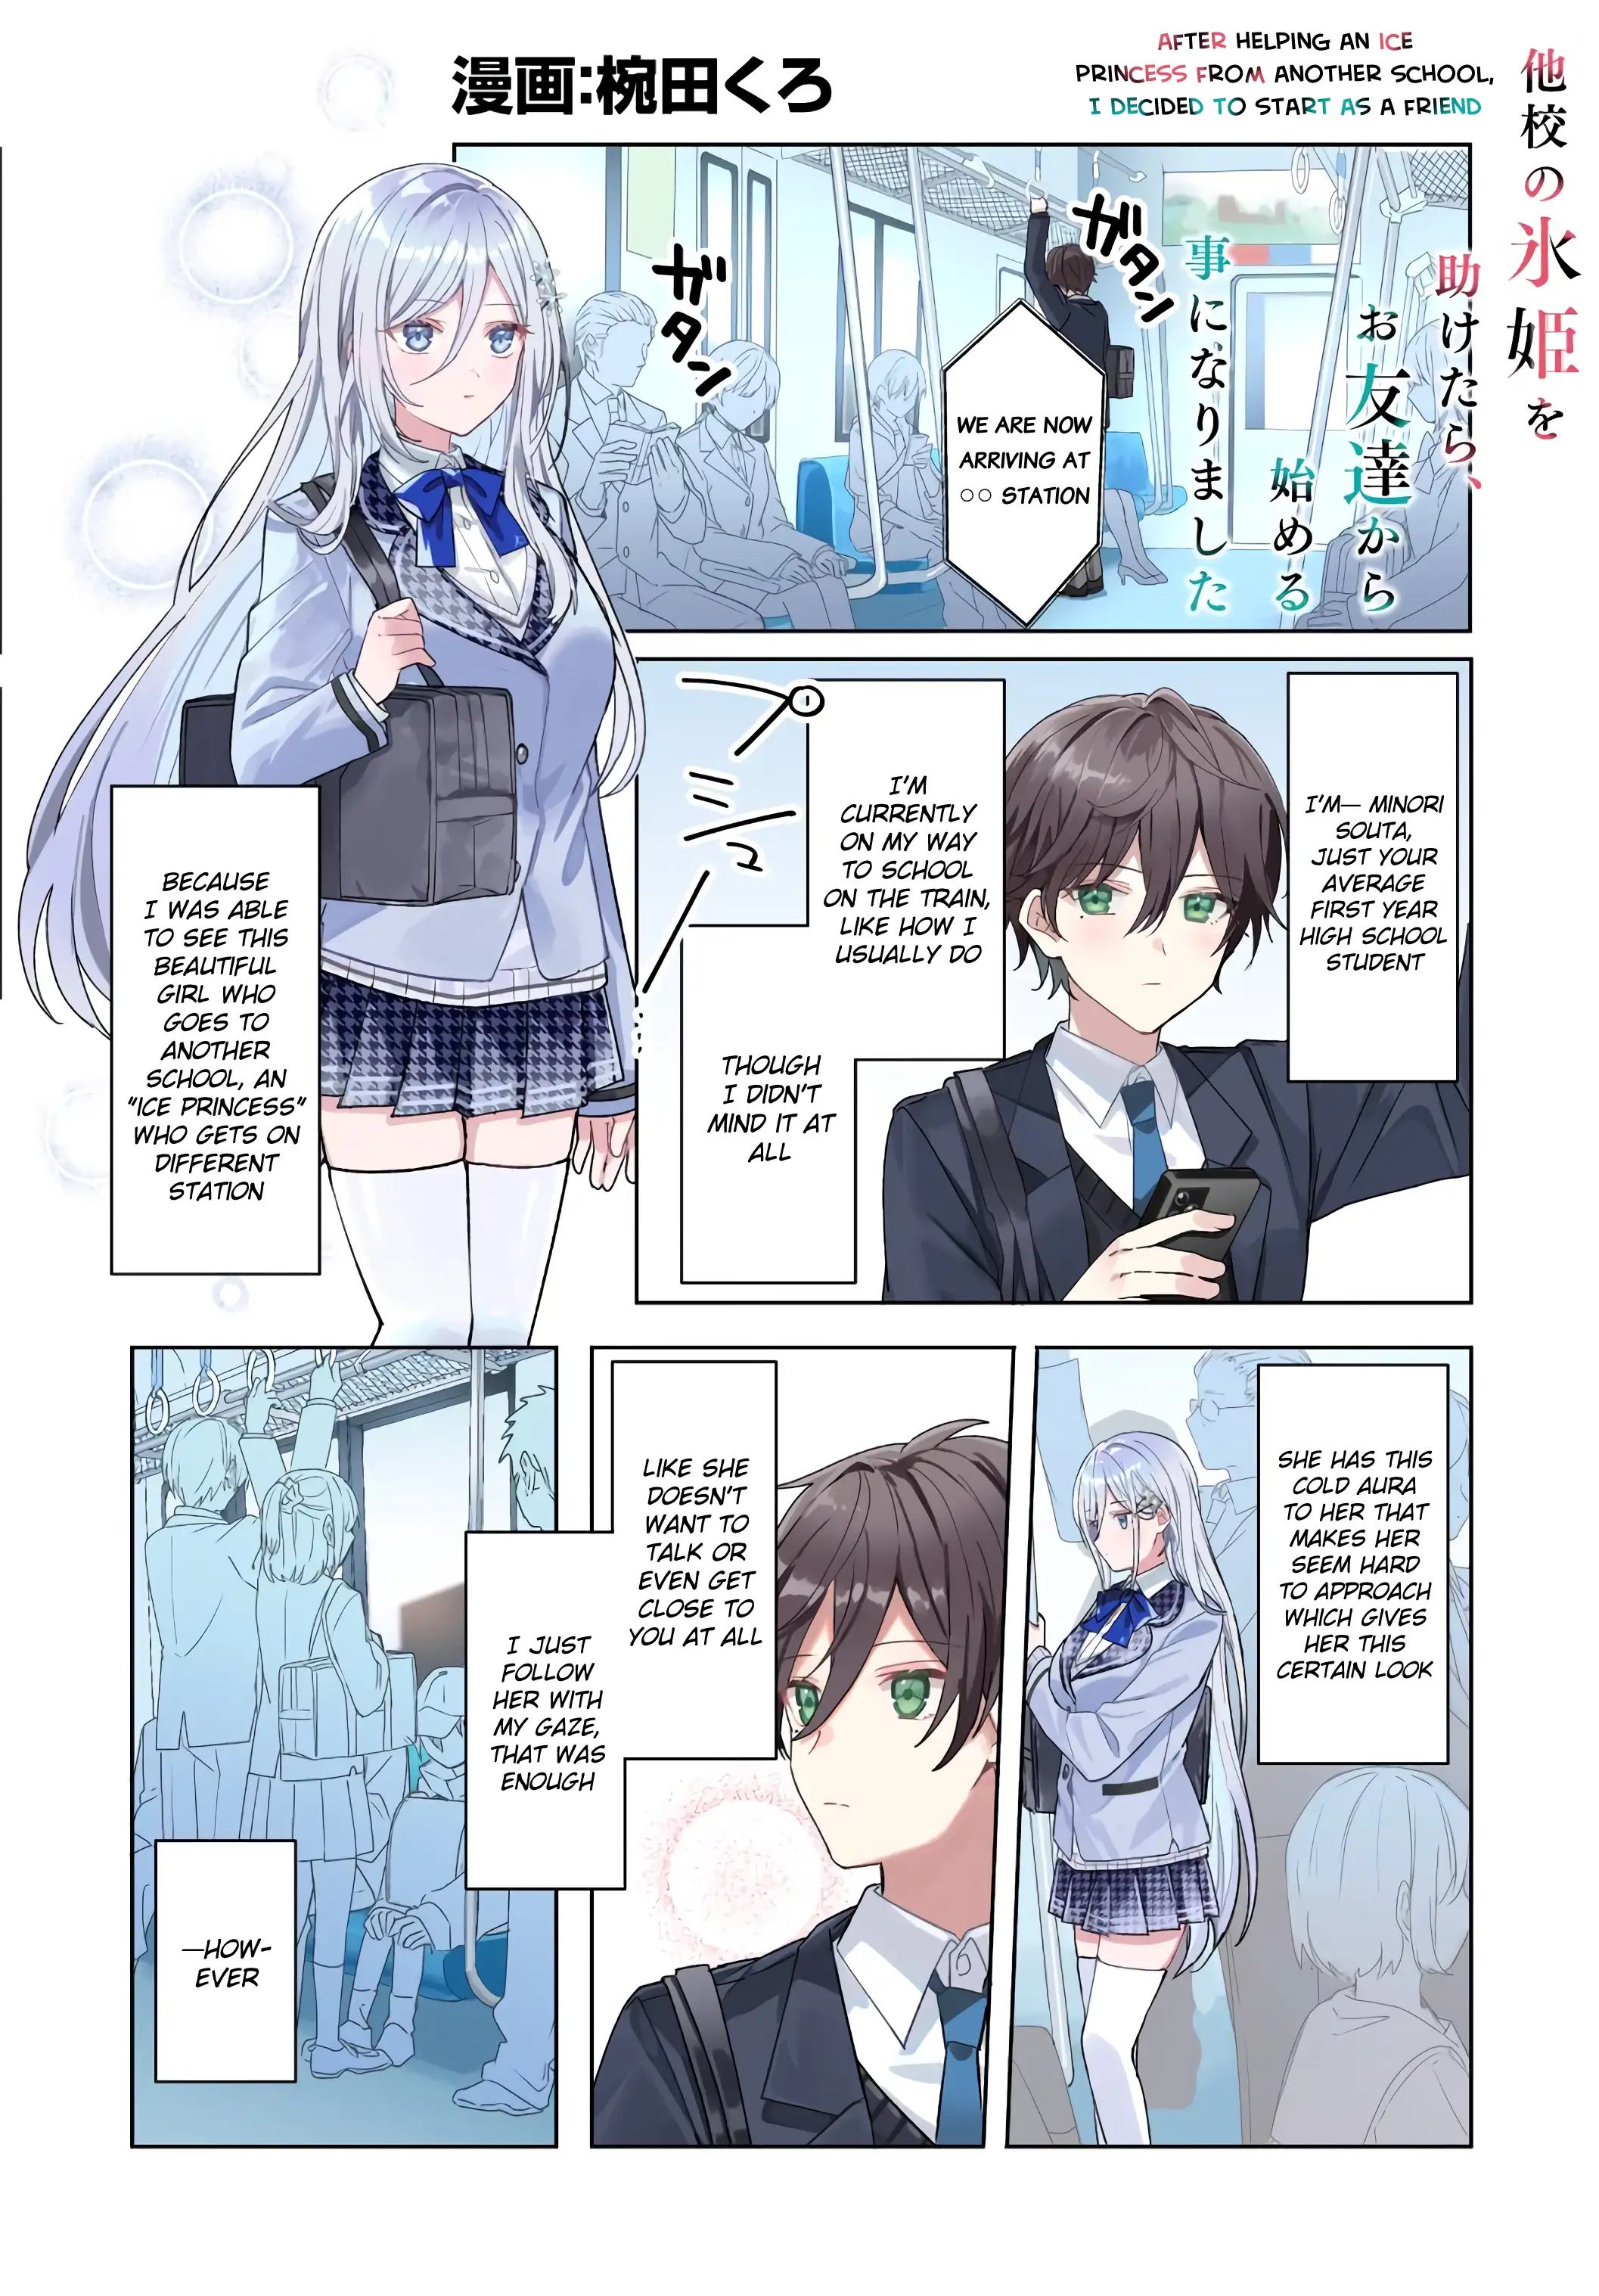 After helping “Ice Princess” from another school, I decided to start as a friend - chapter 0 - #2